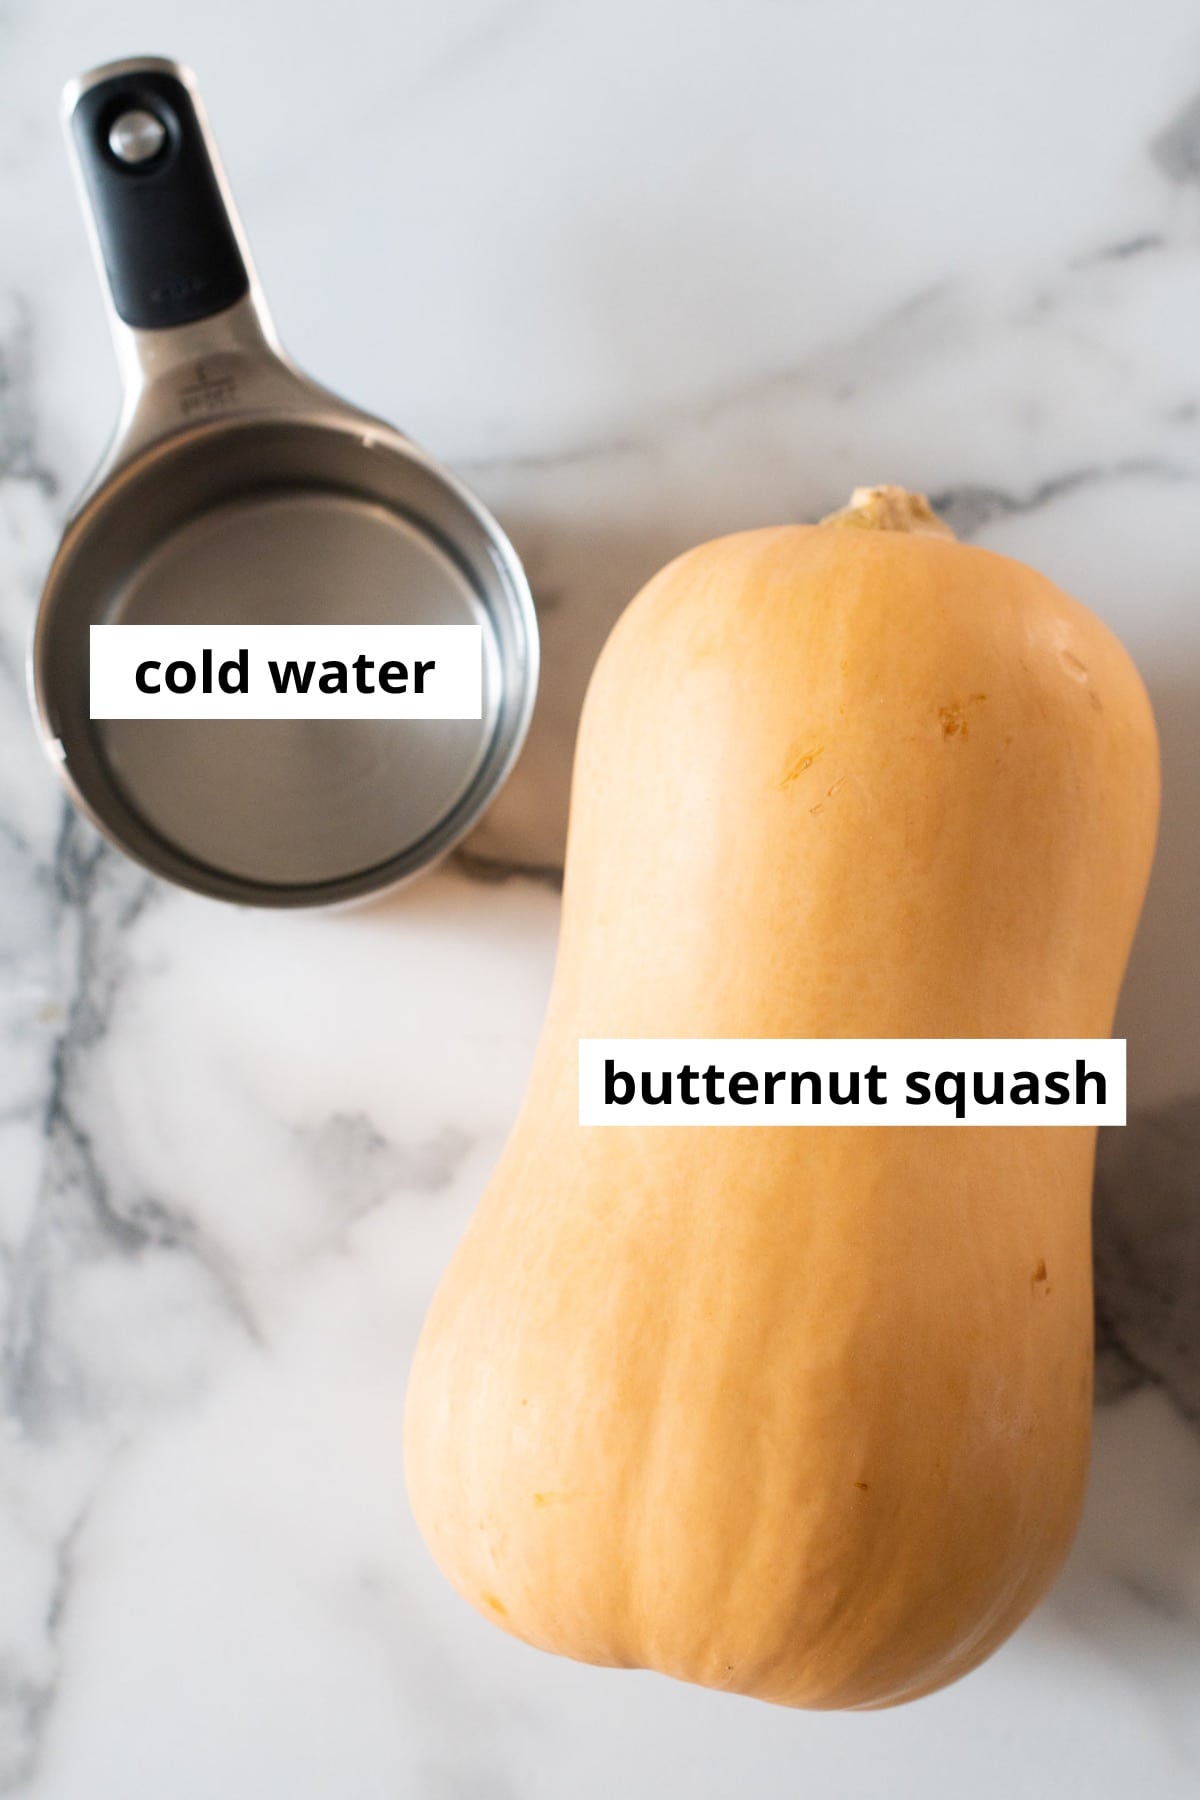 A whole butternut squash and cold water in measuring cup.